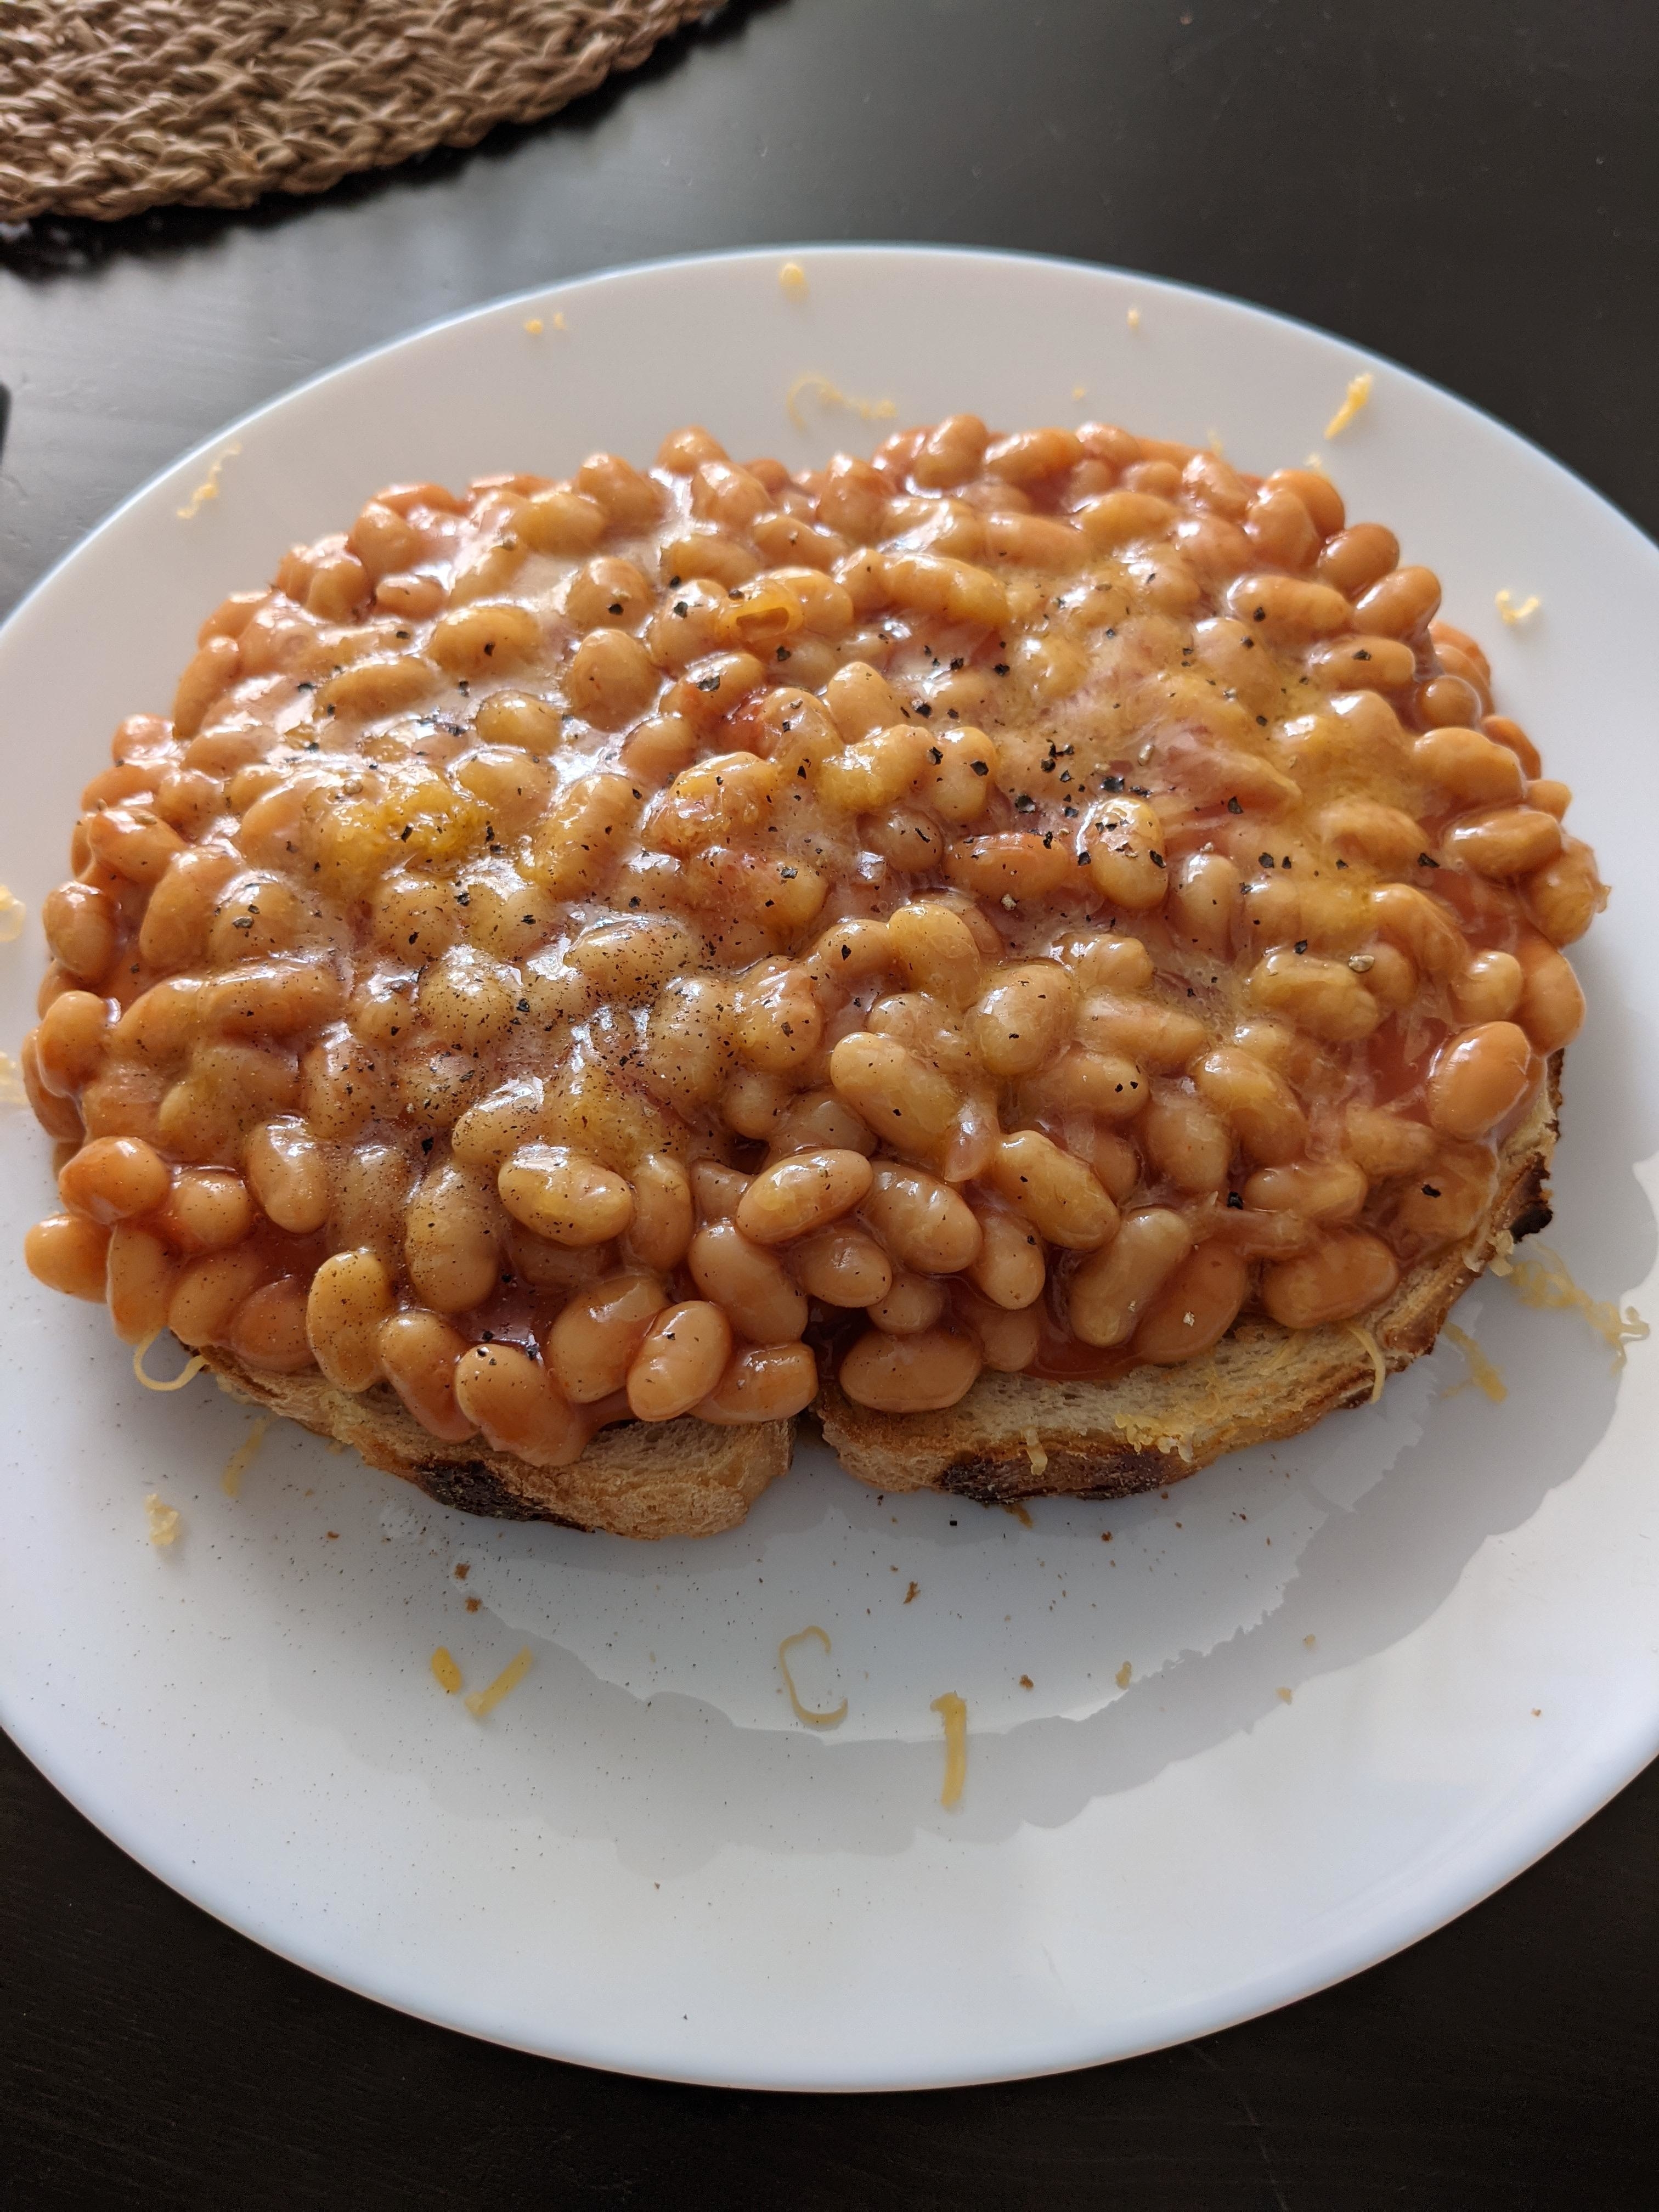 Close-up of baked beans and shredded cheese on top a piece of toast